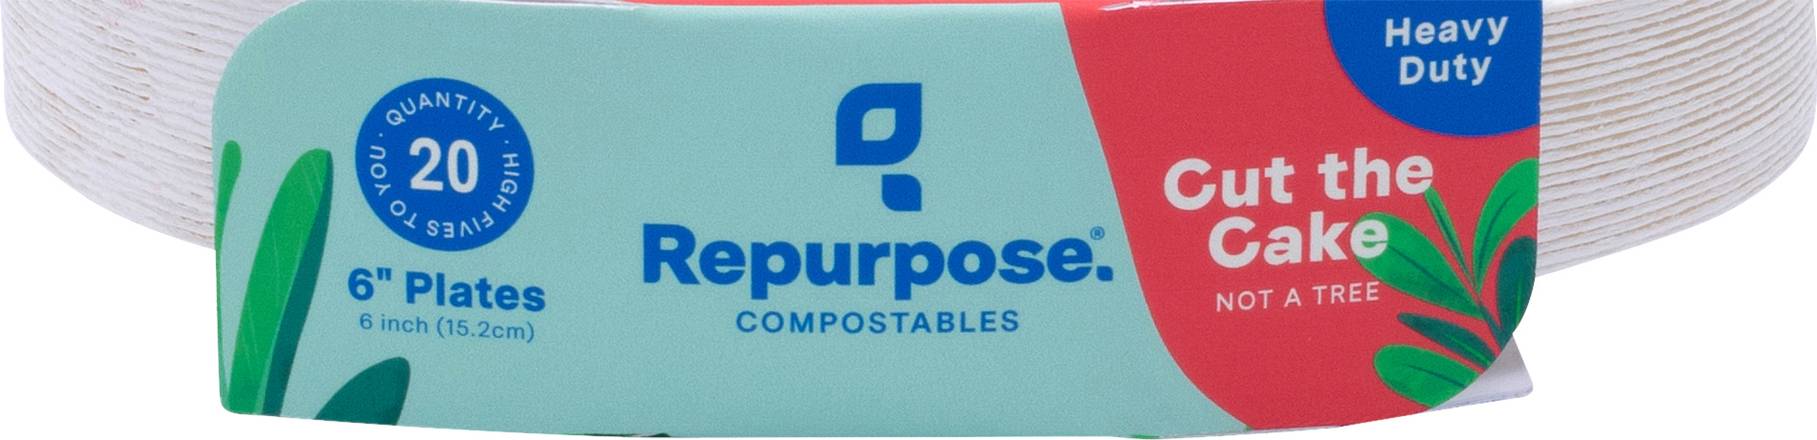 Repurpose 6 in Heavy Duty Compostable Plates (20 plates)